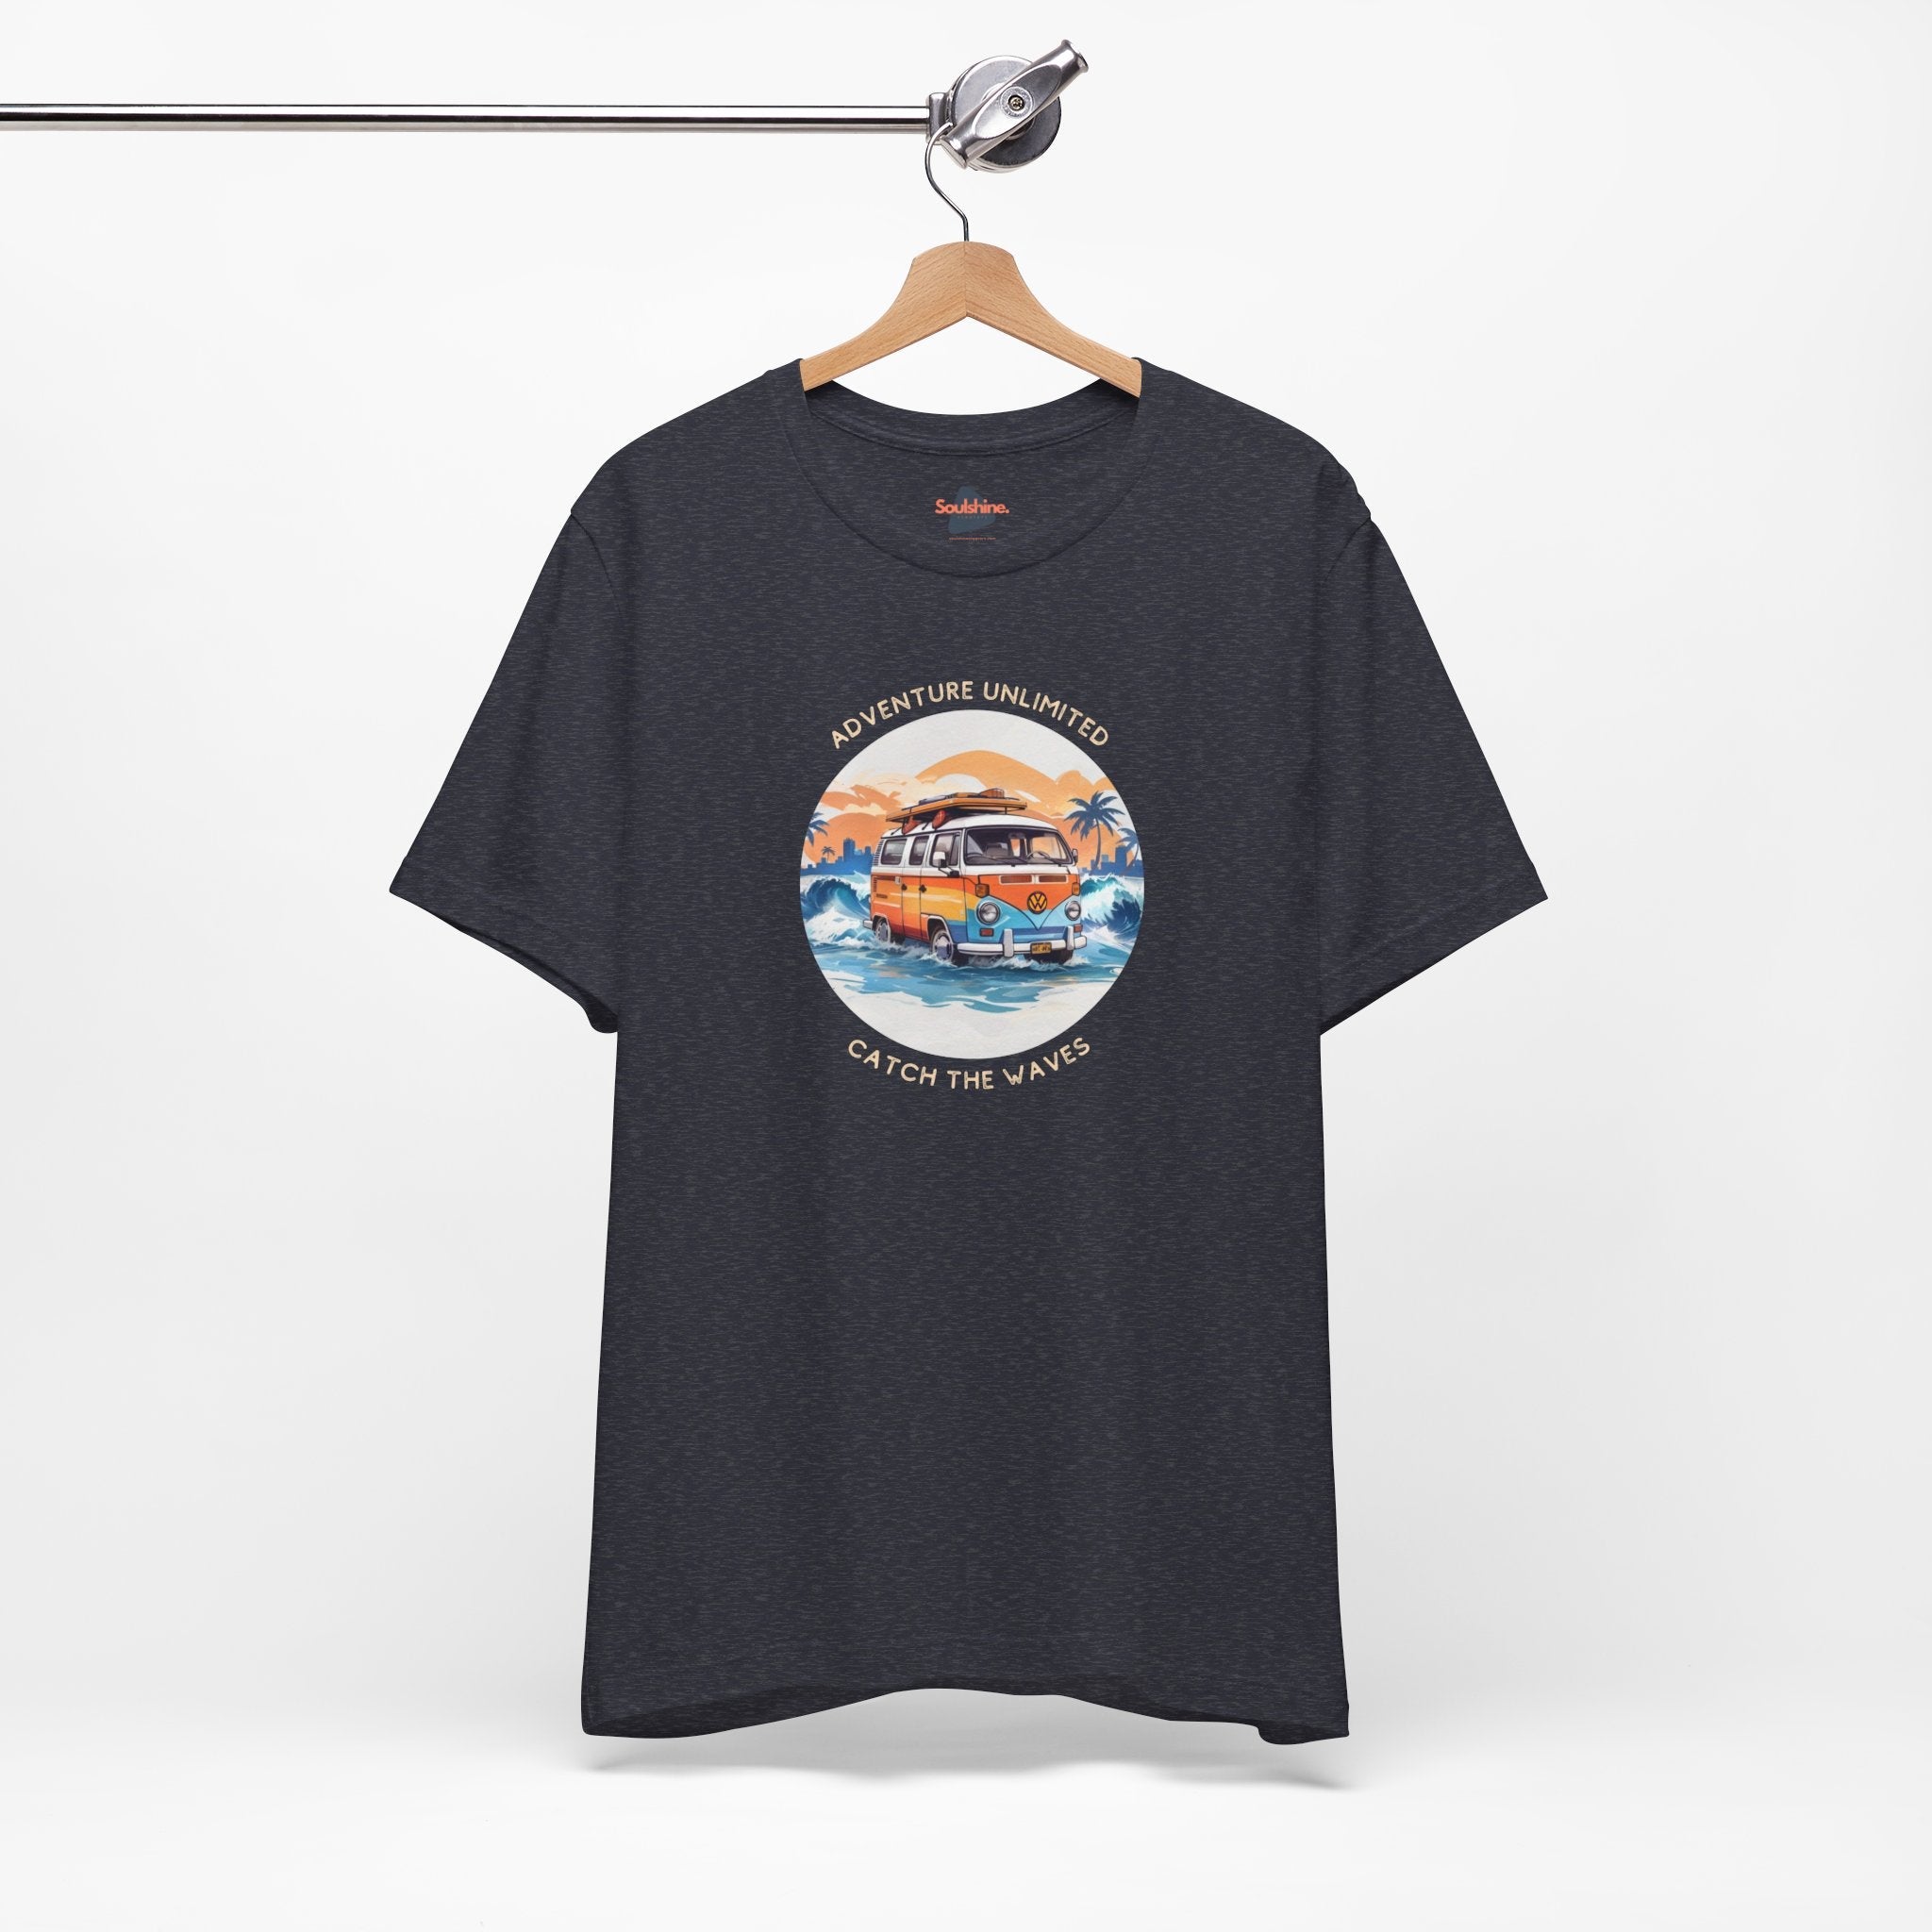 Adventure Unlimited boat-printed black unisex jersey tee - direct-to-garment printed item